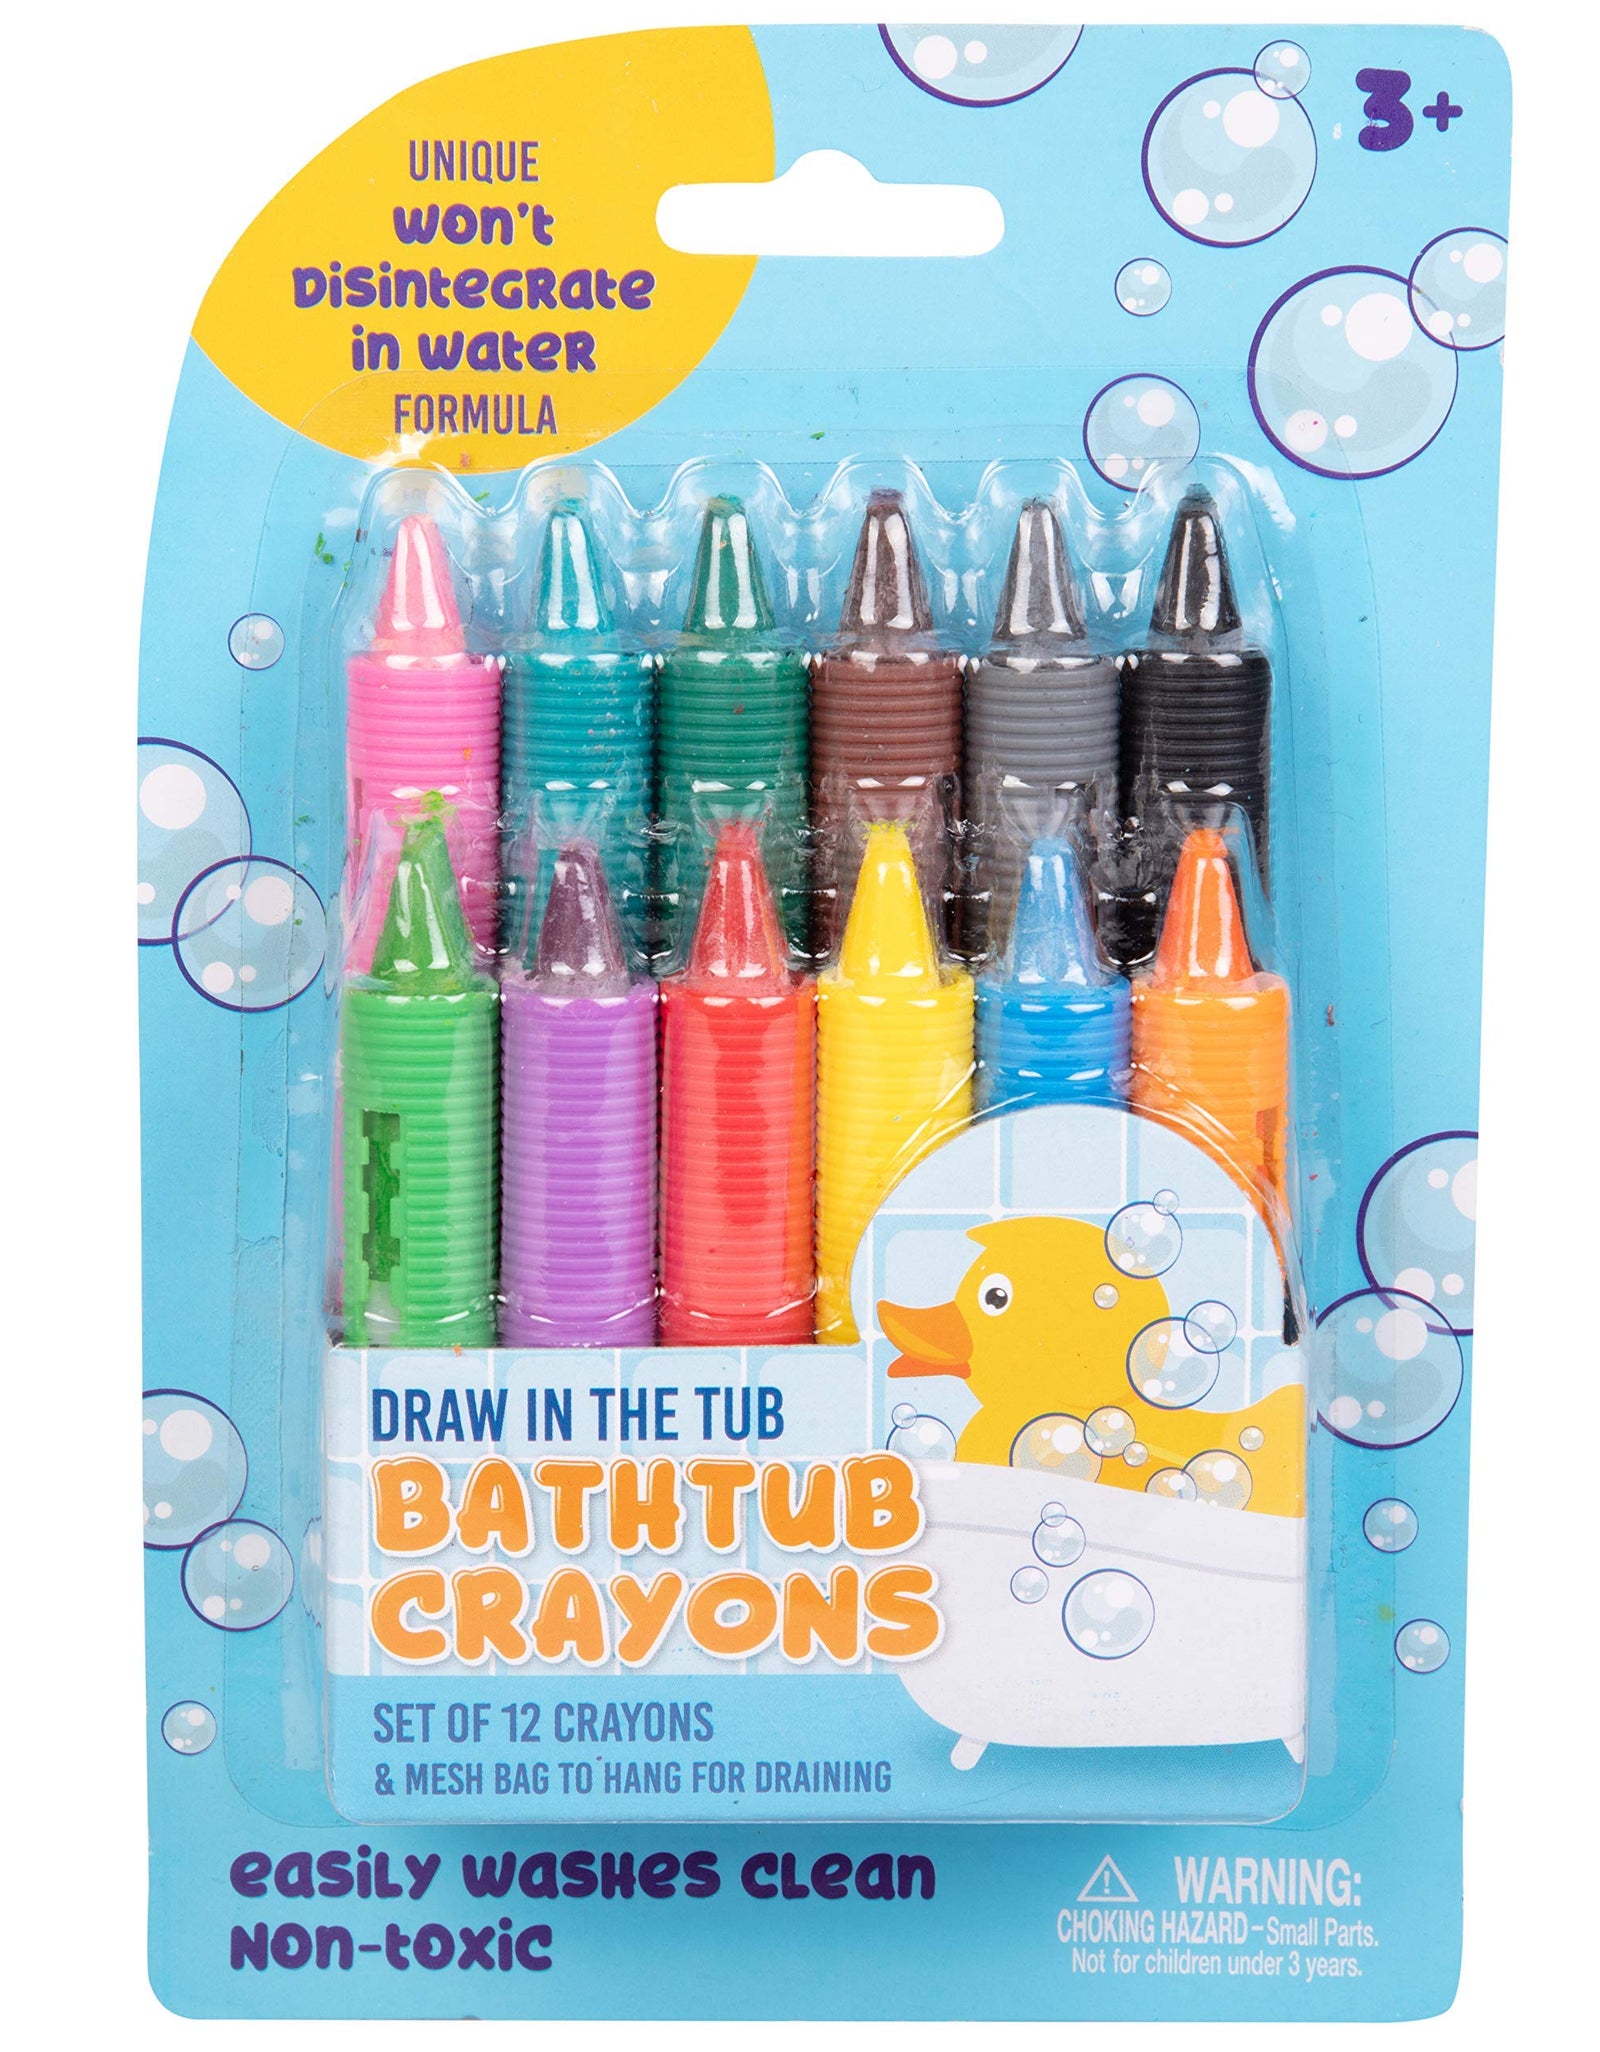 Bath Crayons Super Set - Set of 12 Draw in The Tub Colors with Bathtub Mesh Bag, Unique Won't Disintegrate in Water Formula - Easter Basket